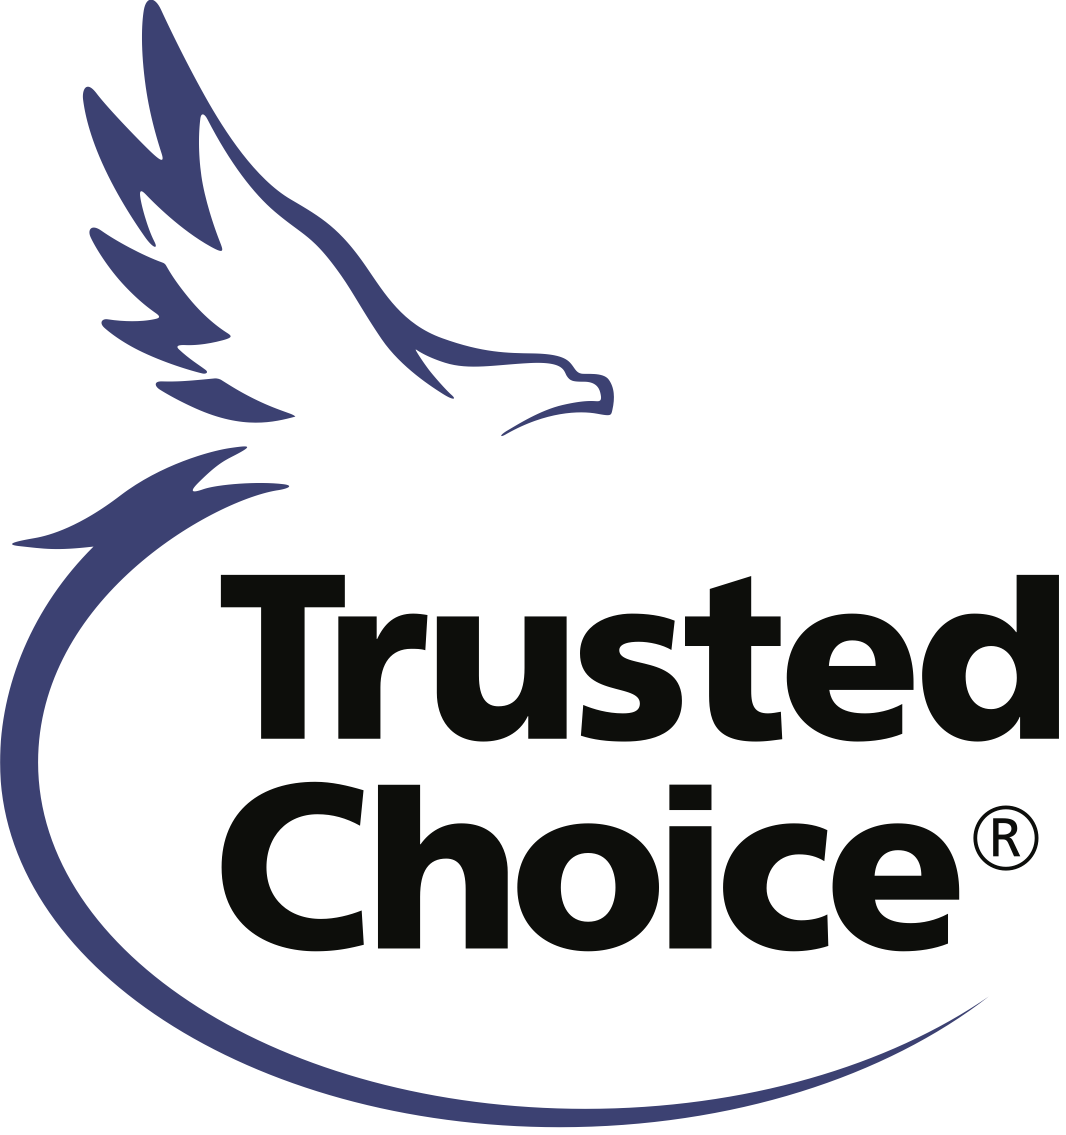 Cohen-Putnam is a Trusted Choice Agency